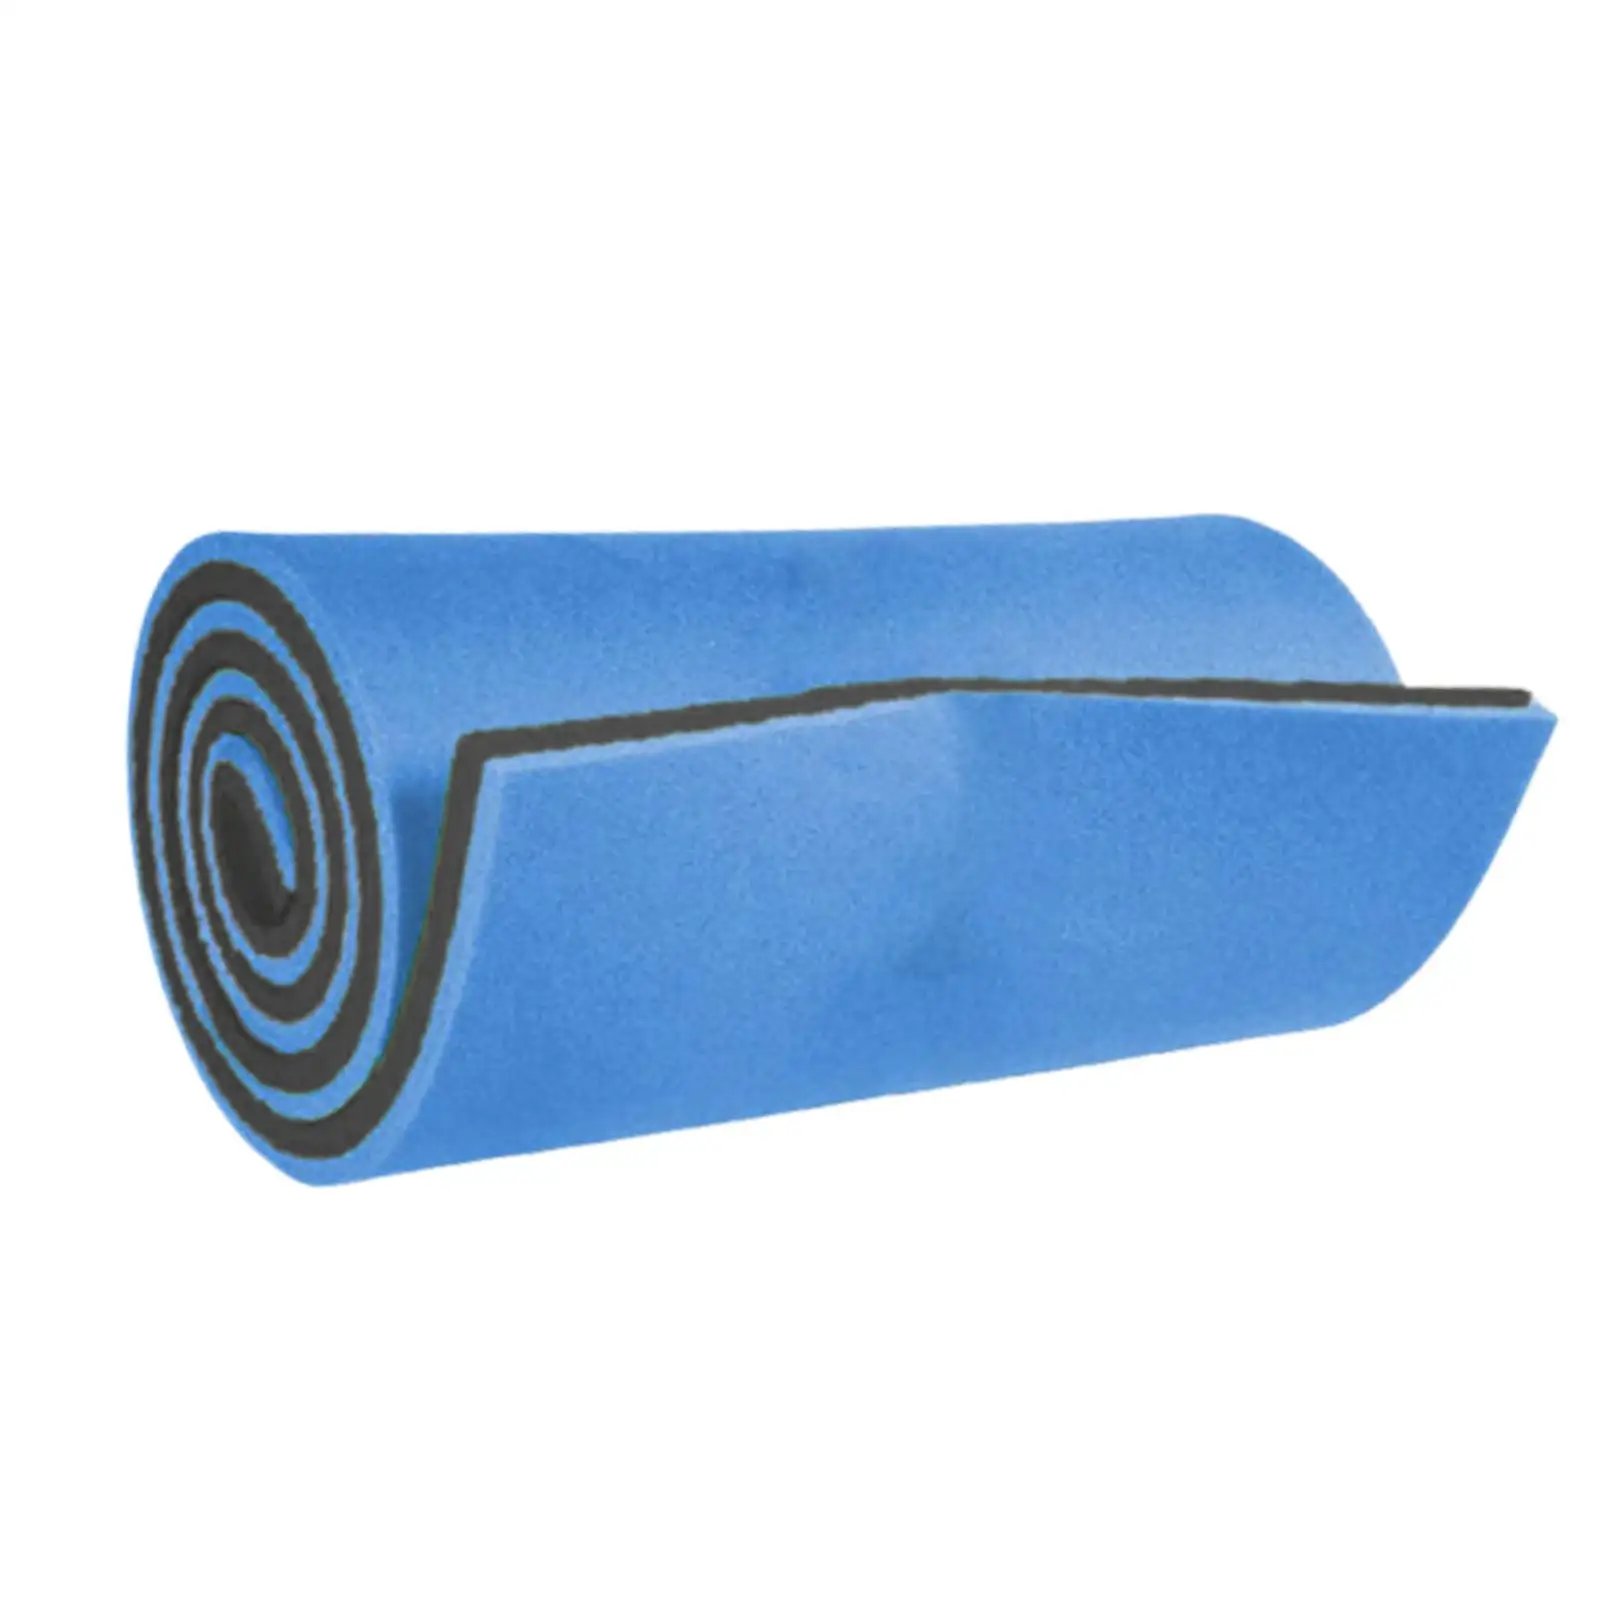 Floating Water 2 Layer Floating Pad Tear Resistant XPE Foam Mat Roll up Floating River Rafts for Pool Beach Lake